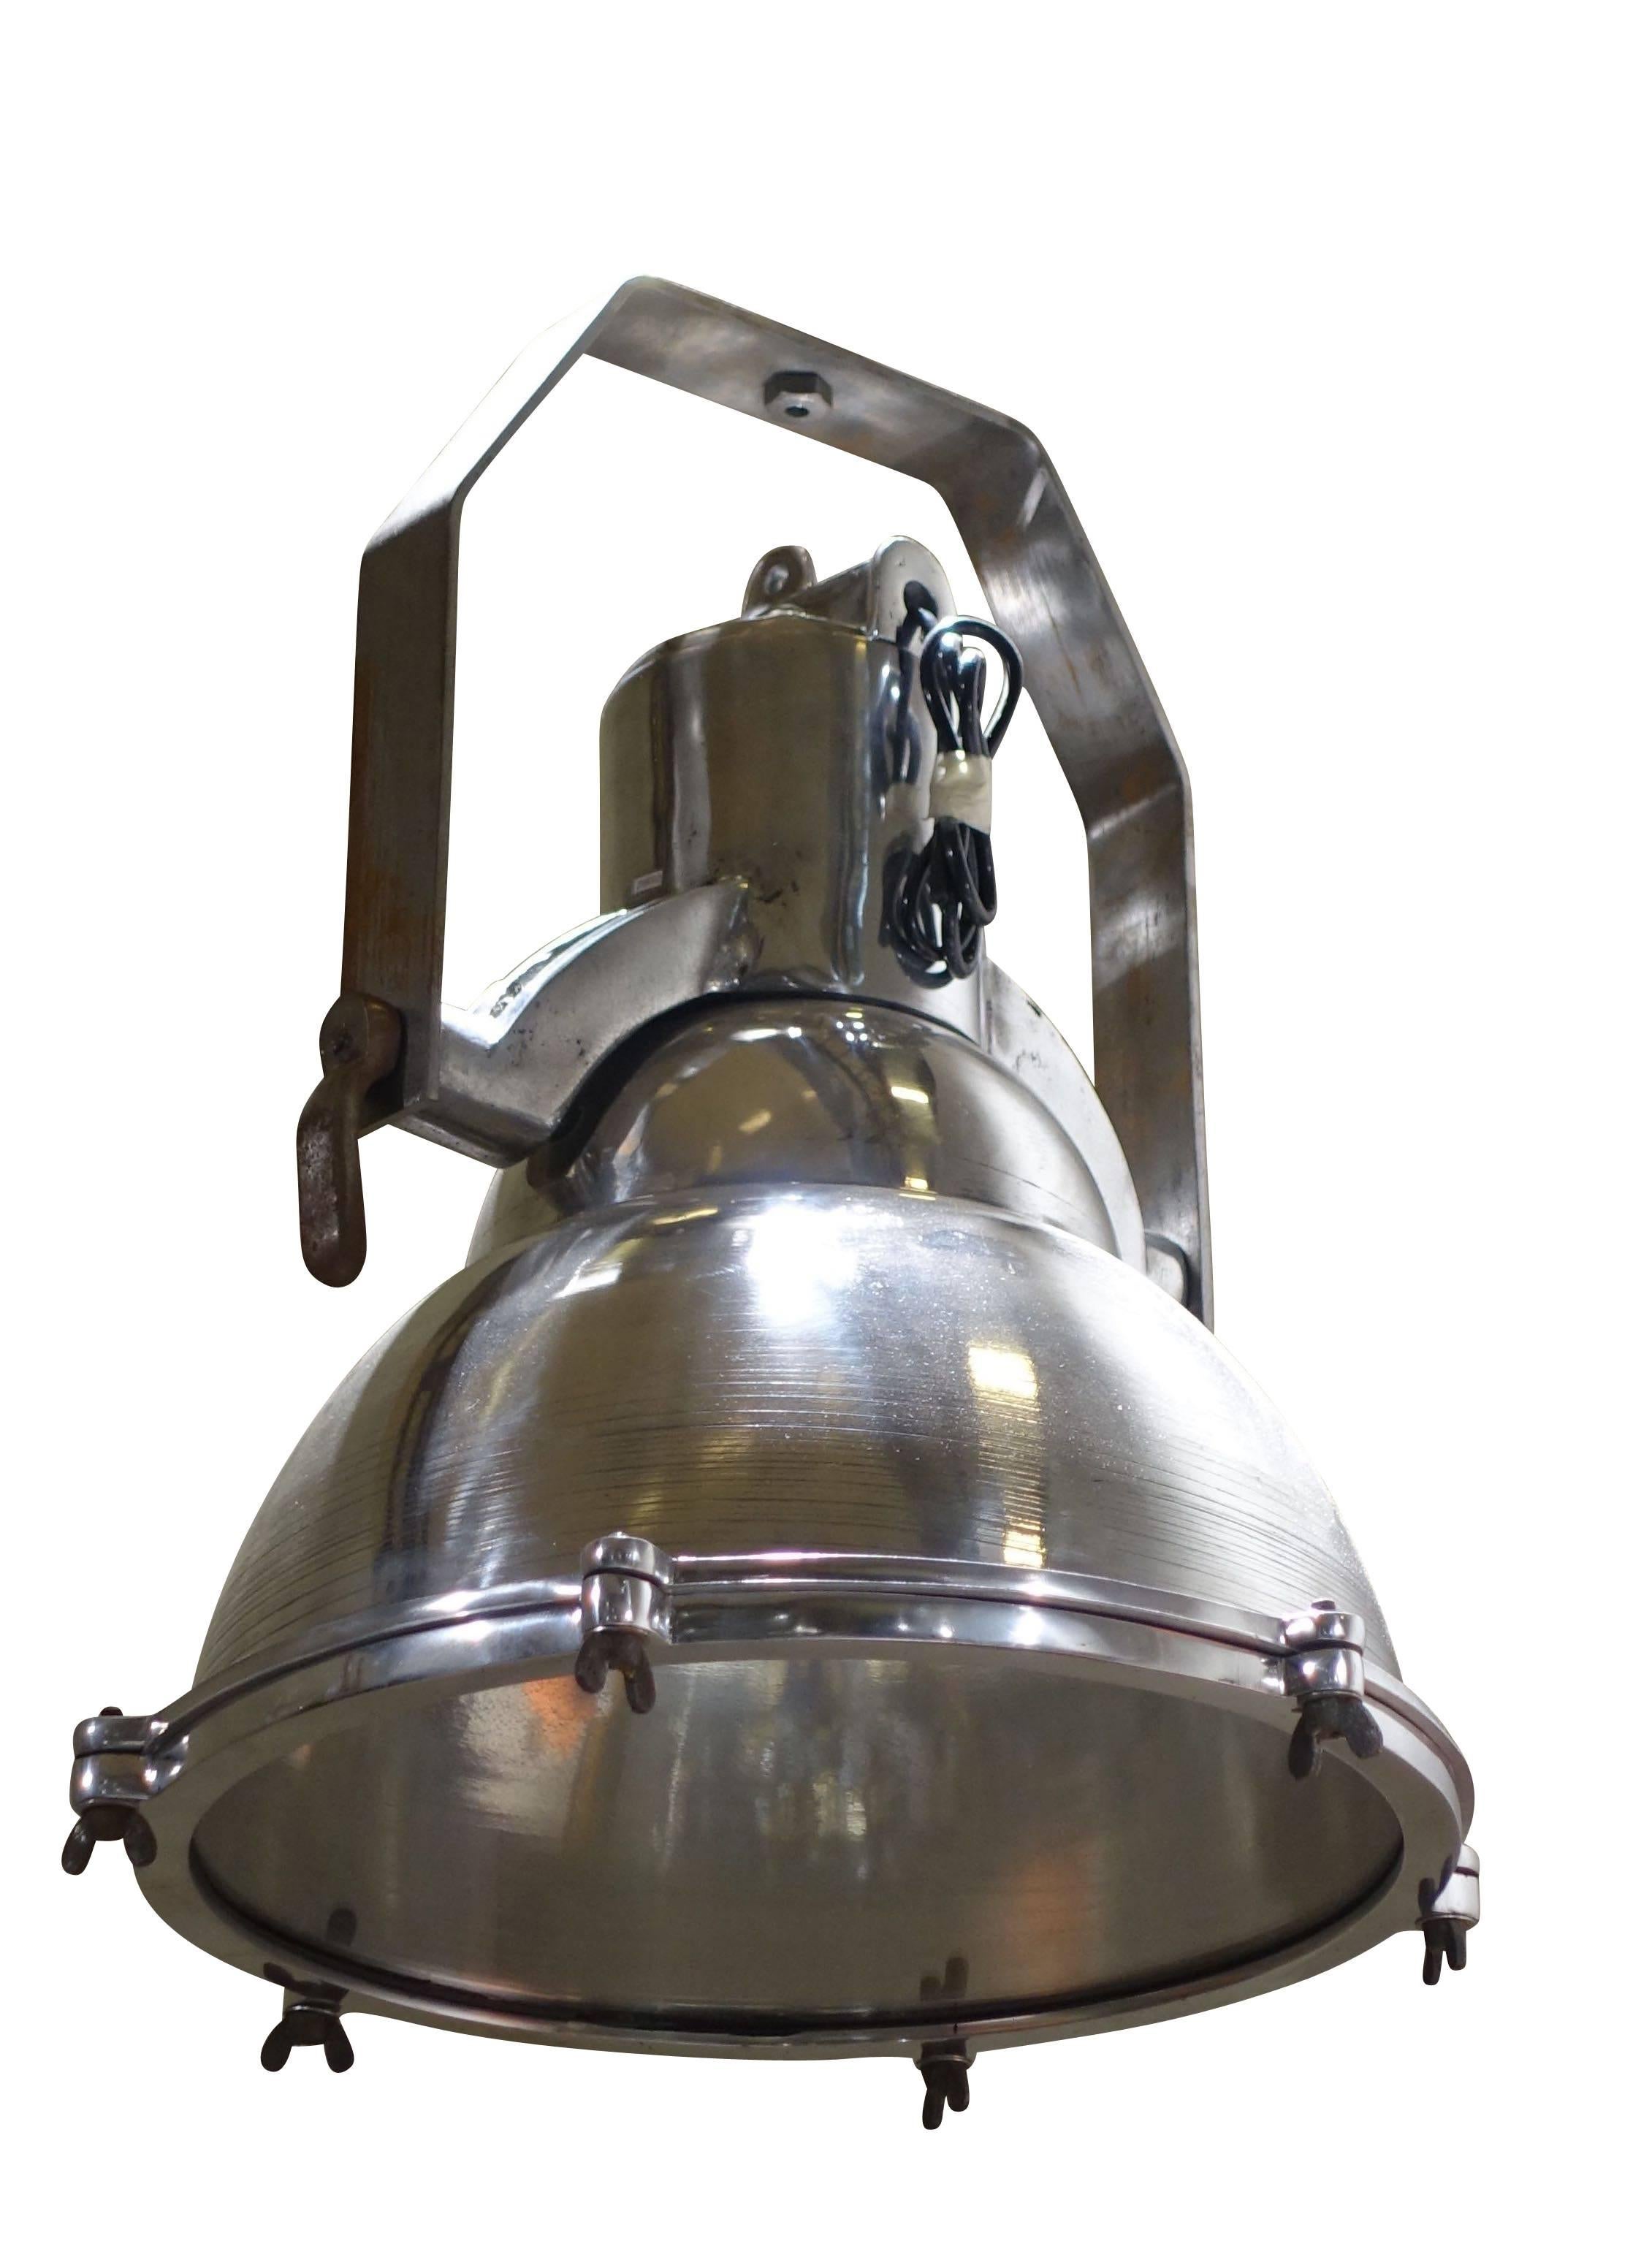 1930s English Industrial light originally used on a freighter as a search light.
Original hardware.
Made of aluminum and brushed steel.
Two available.
Excellent condition for age.